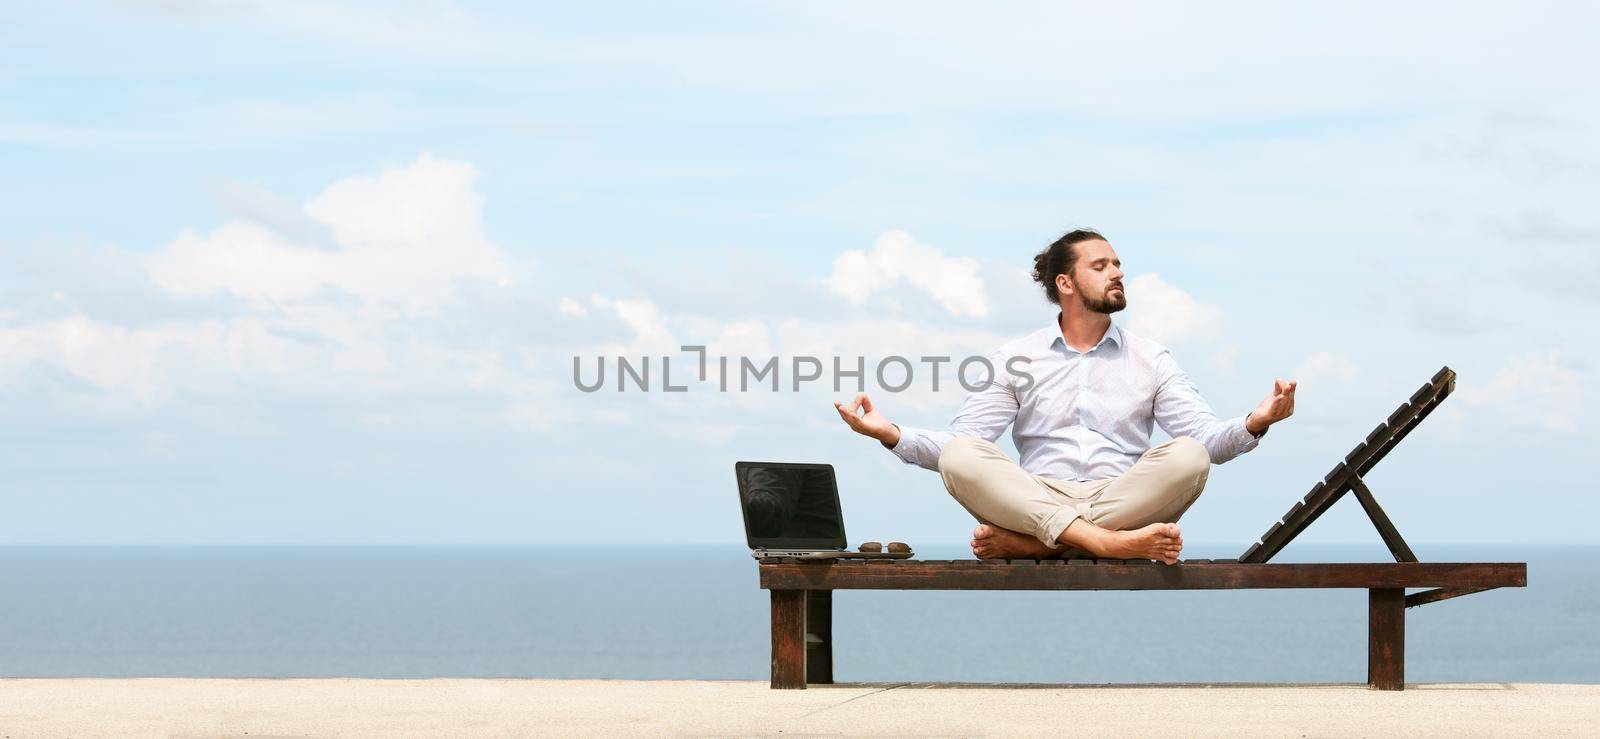 Businessman wearing a suit on deck chair doing Yoga on the beach